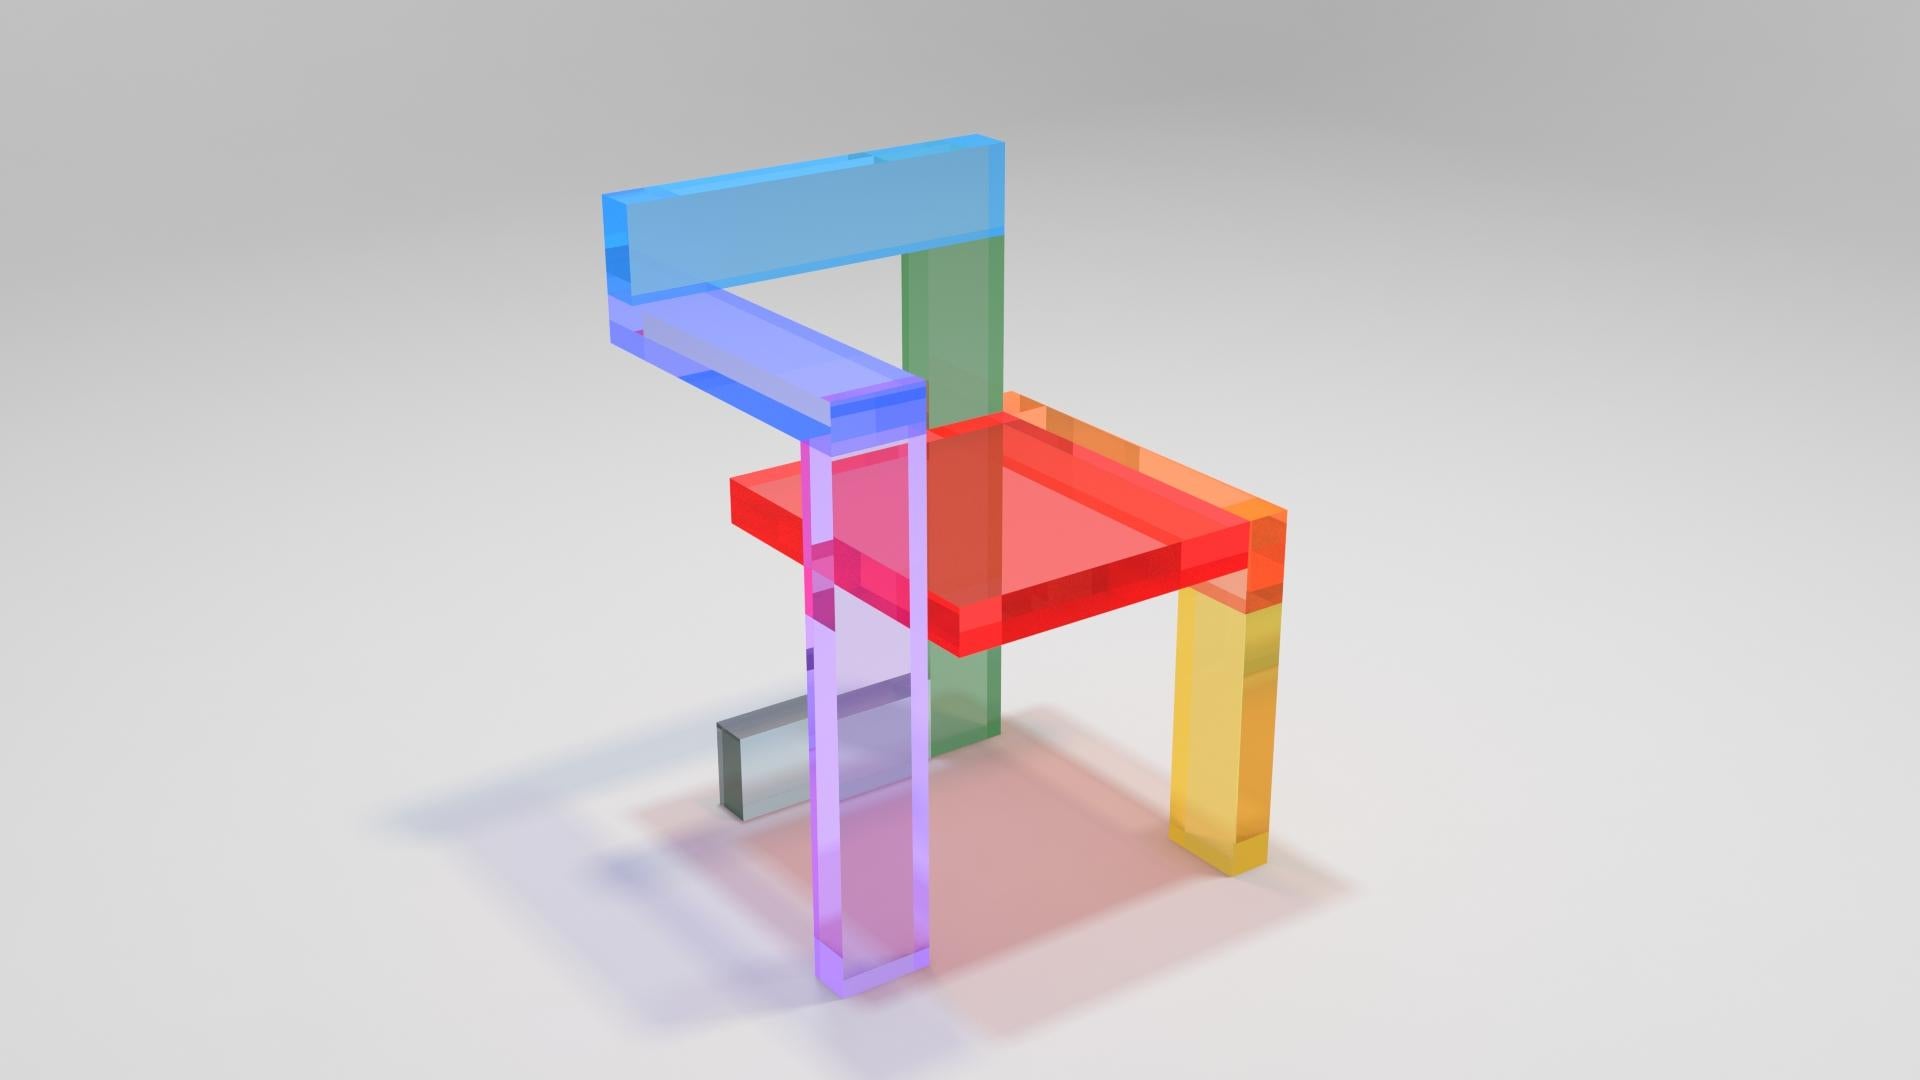 Chair re-designed by Alessandro Guerriero for the Alchimia Redesign Collection. The piece is a tribute to the famous Steltman chair designed by Gerrit Rietveld. The chair is made of colored plexiglas. Each chair has a sequence of different colors